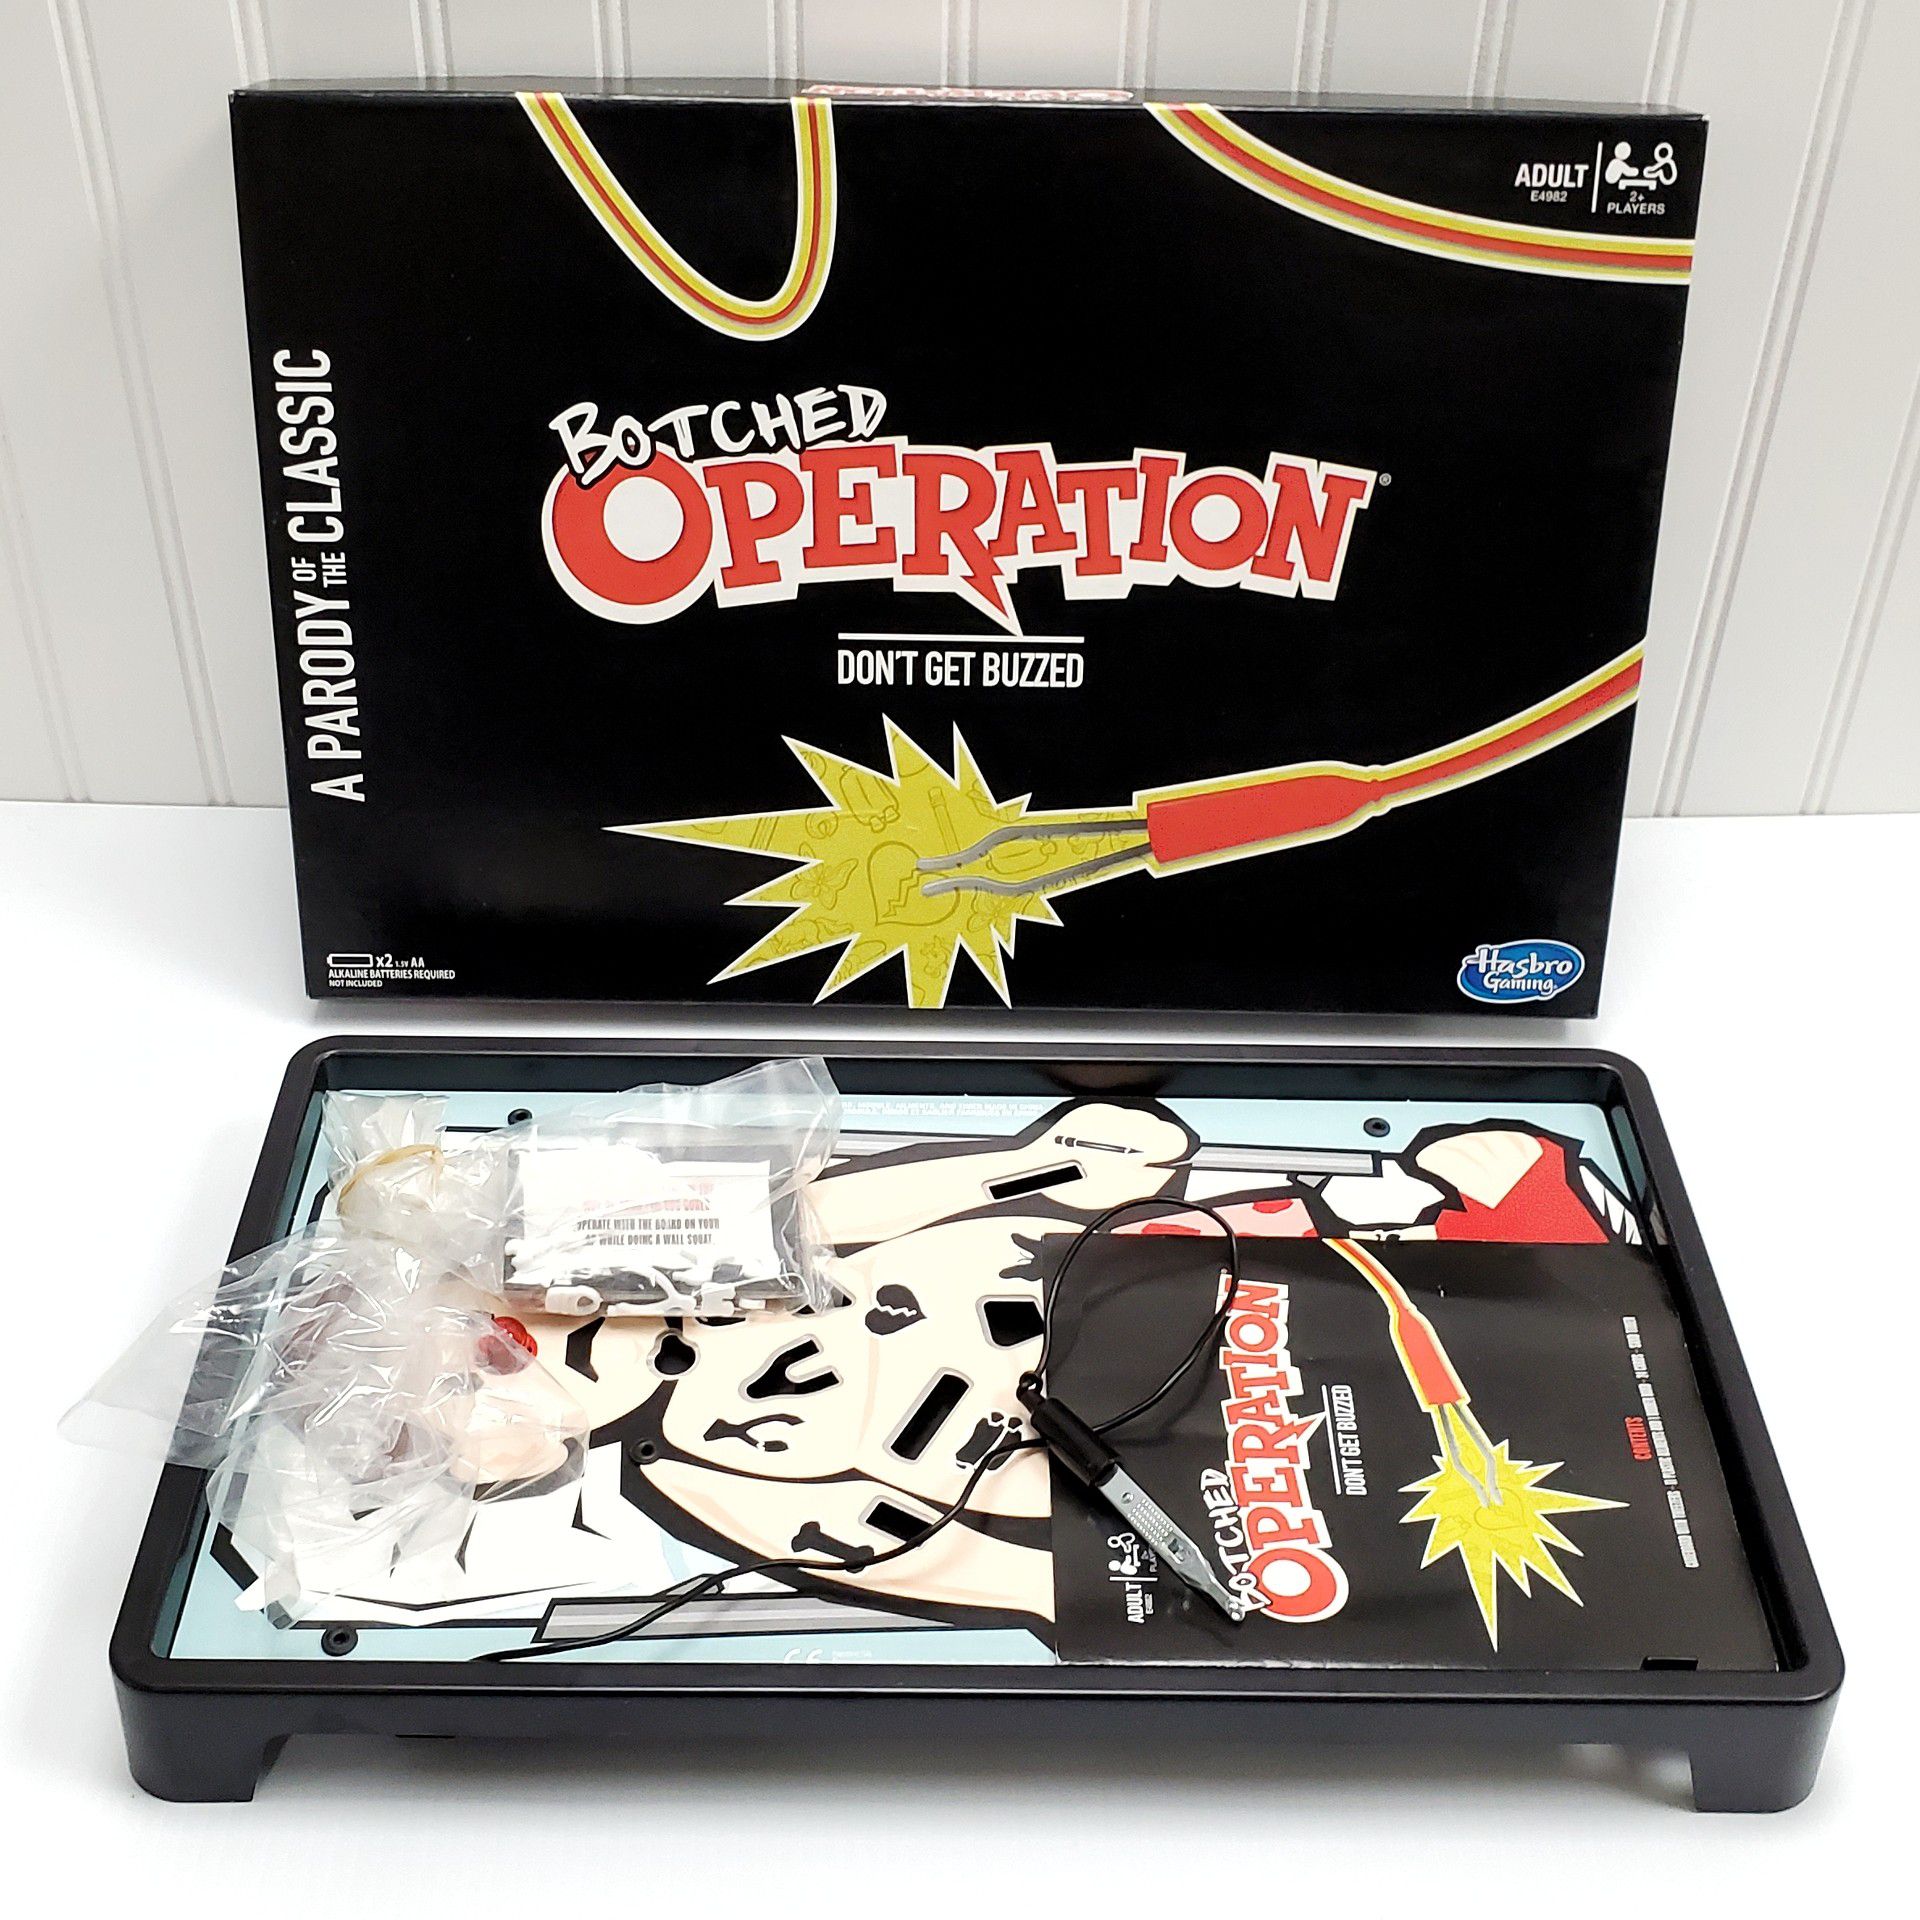 Hasbro Botched Operation Board Game (Adult Parody of Classic Operation) 100%